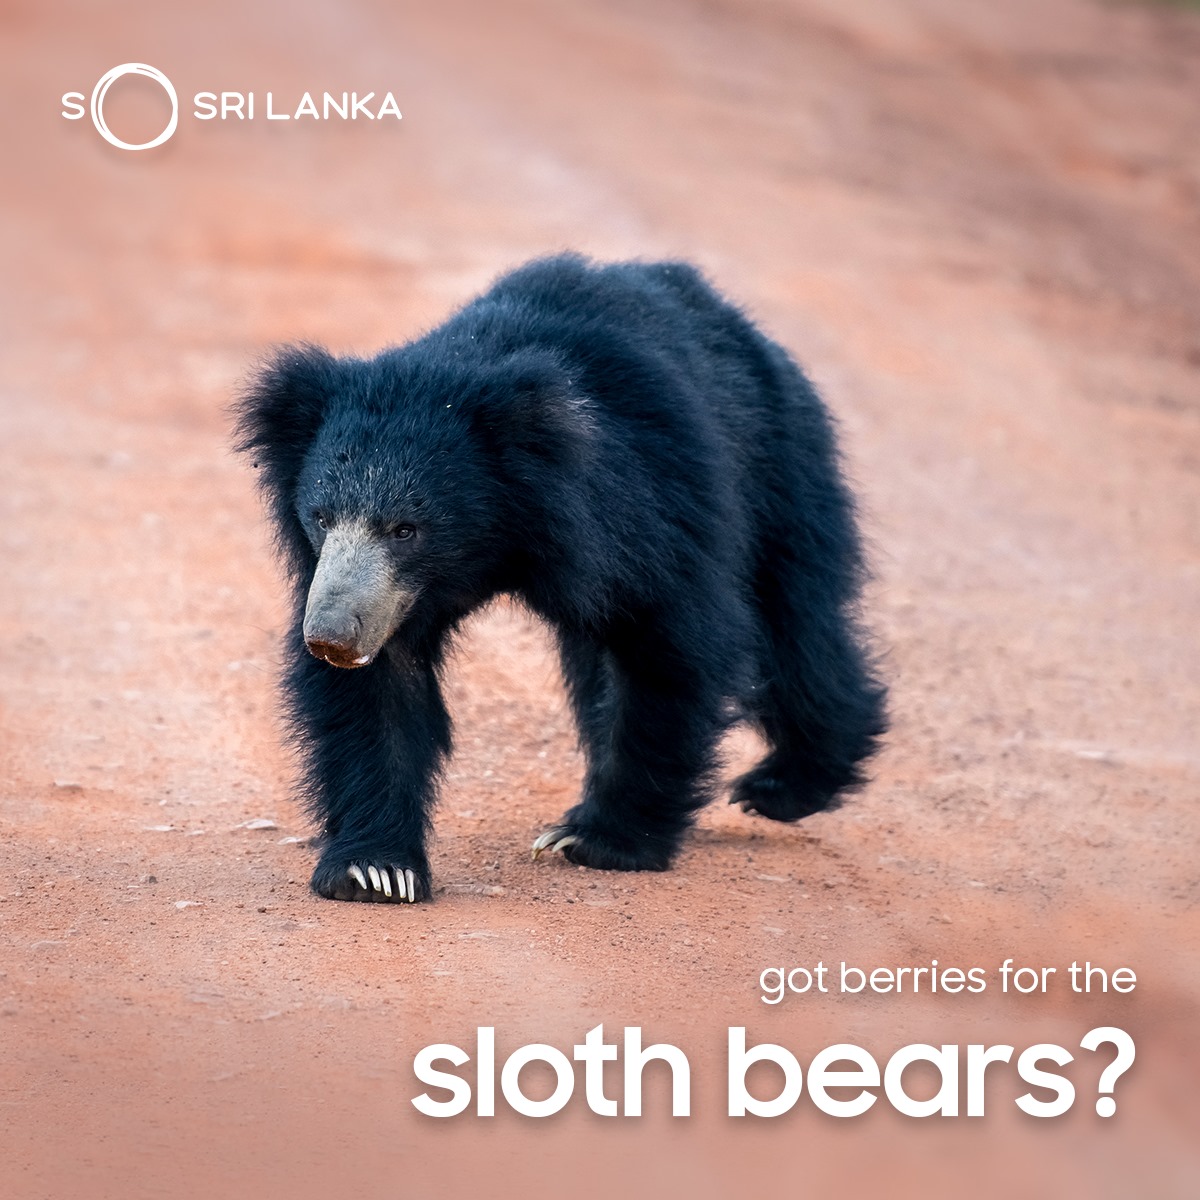 Did you know that there are bears in Sri Lanka? Found in the dry zone forests such as Yala